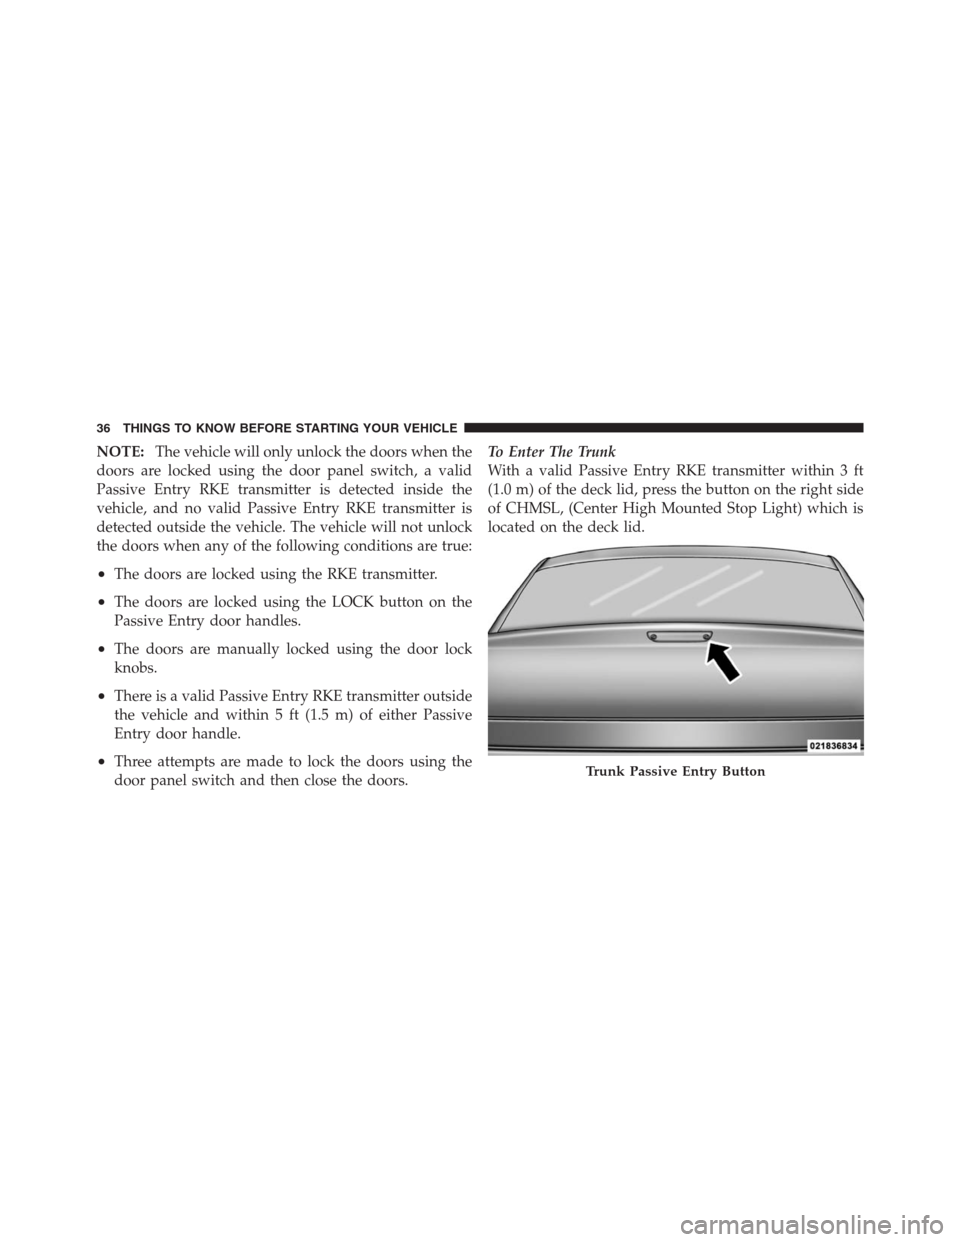 CHRYSLER 300 2012 2.G Owners Guide NOTE:The vehicle will only unlock the doors when the
doors are locked using the door panel switch, a valid
Passive Entry RKE transmitter is detected inside the
vehicle, and no valid Passive Entry RKE 